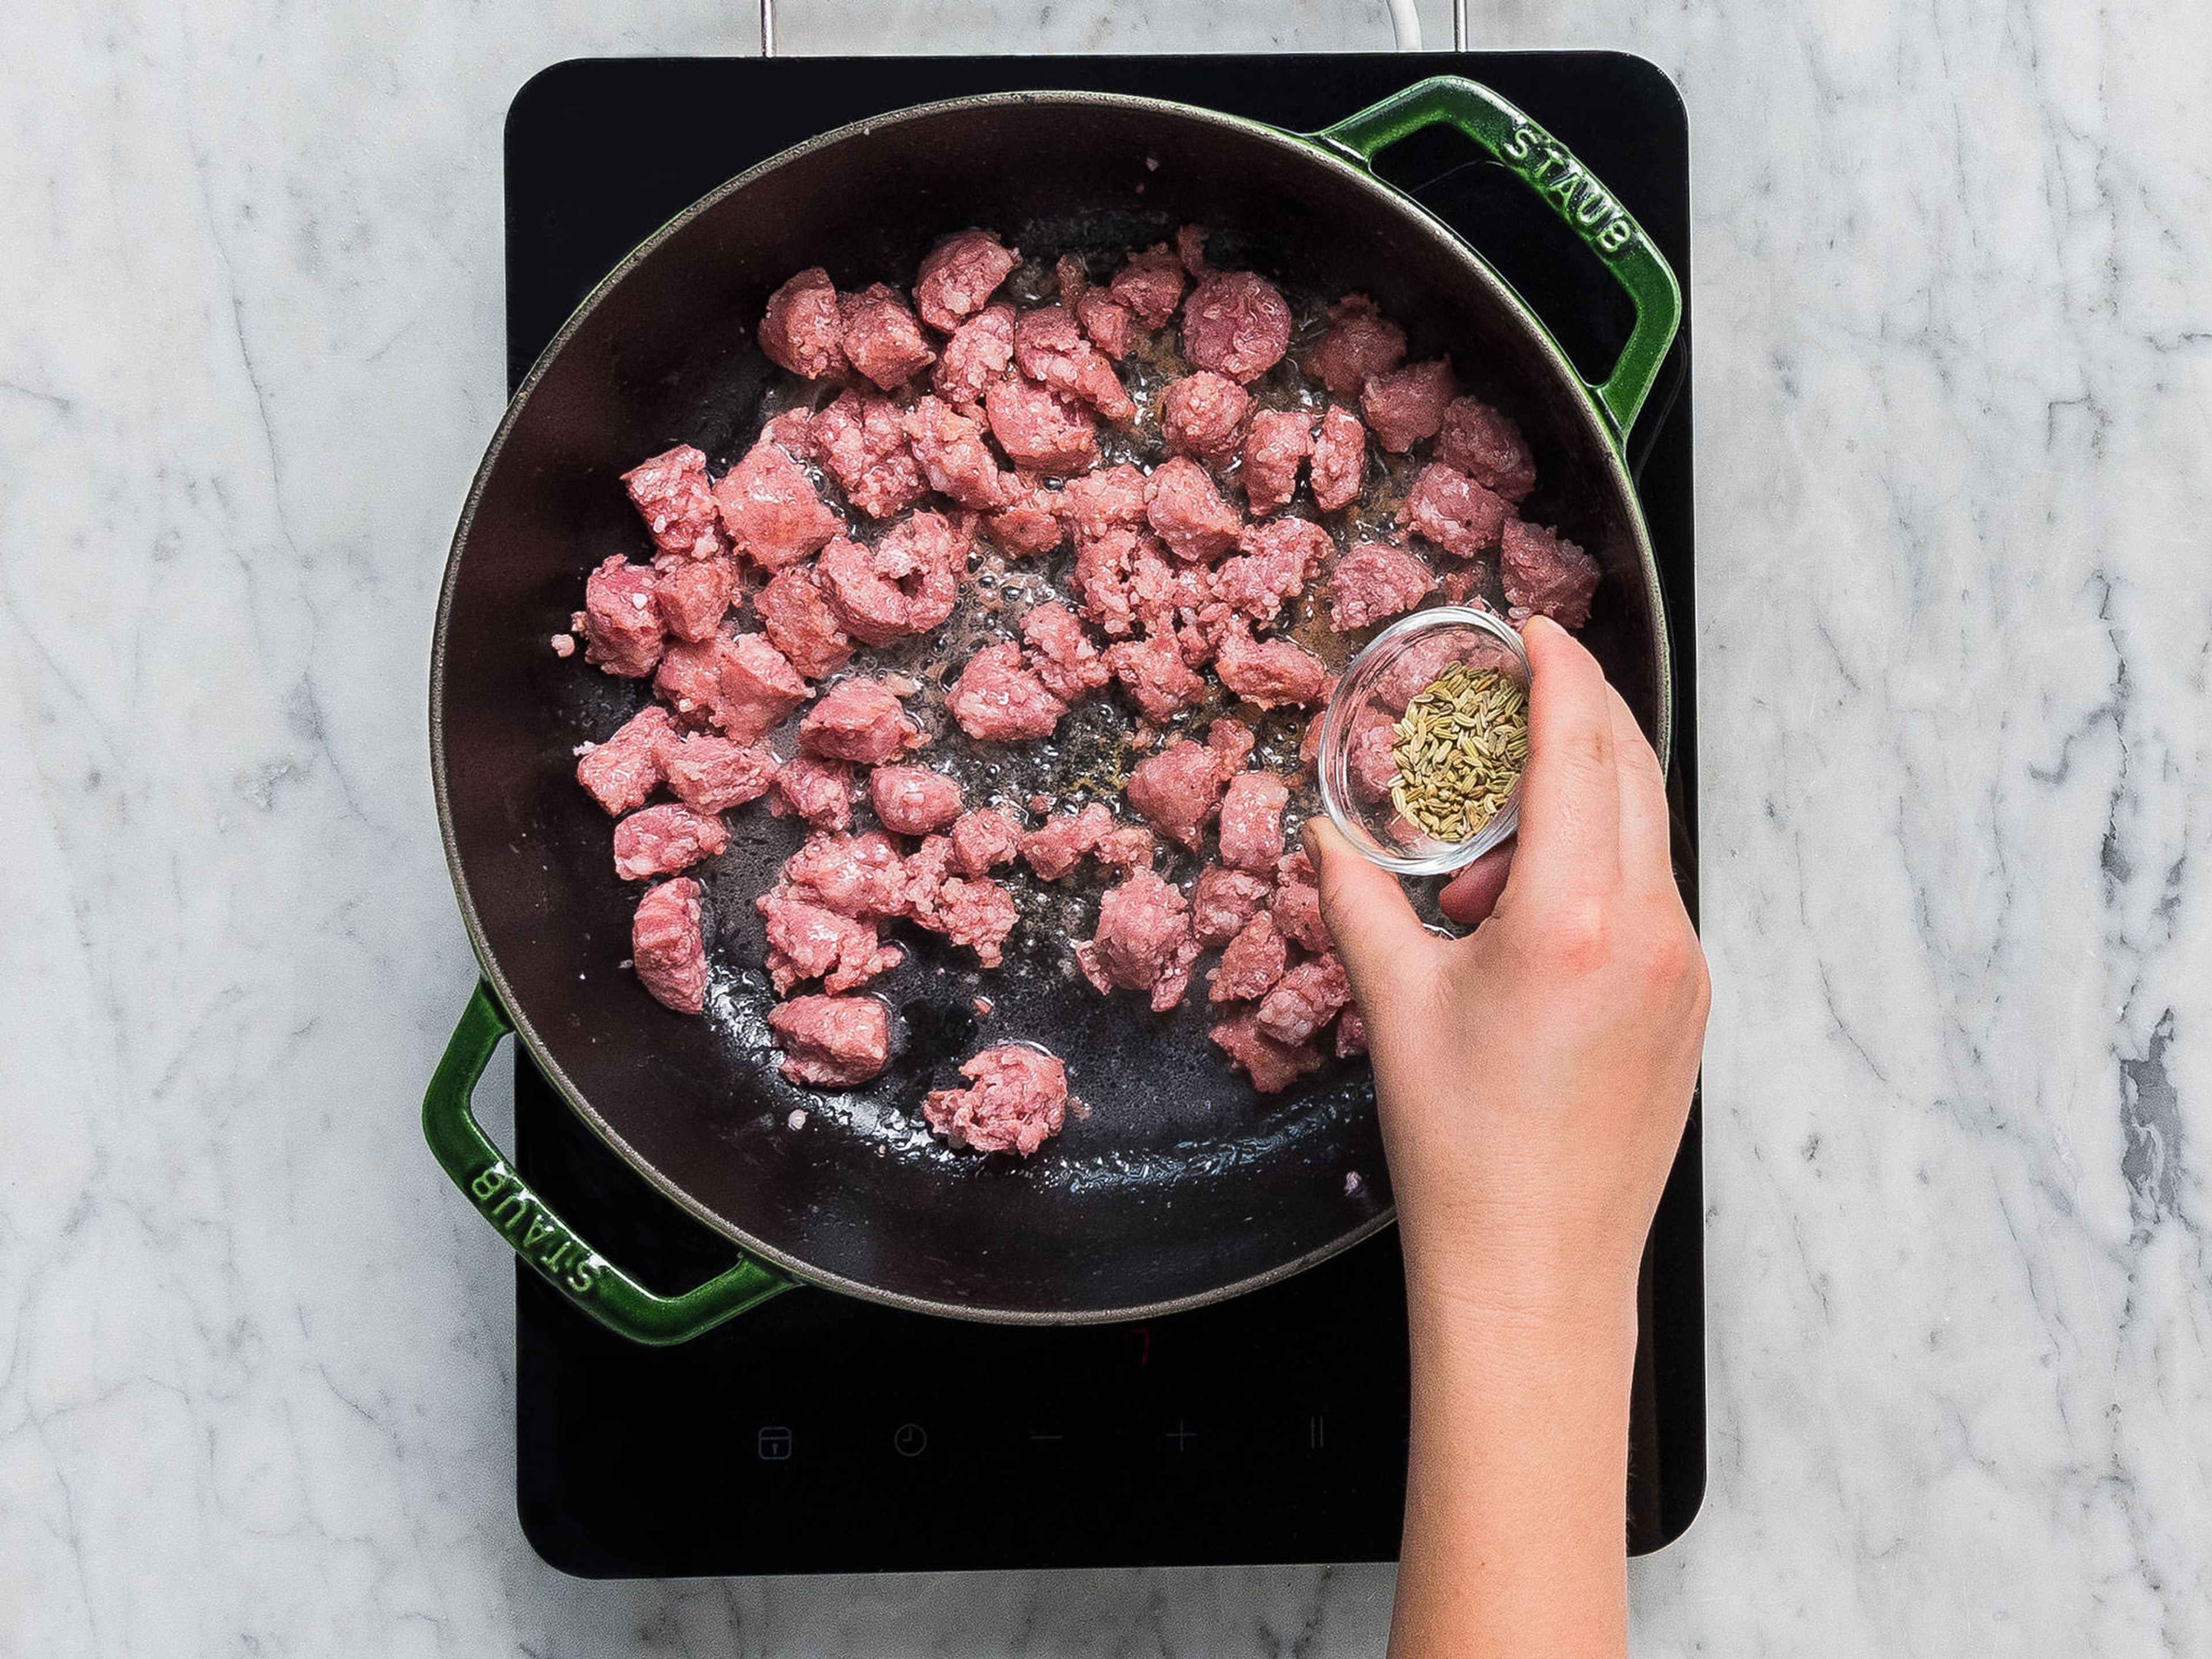 Peel and finely mince the garlic and shallots. Remove sausage meat from casing and chop roughly or crumble. Heat a large frying pan over medium heat, add Italian sausage meat and fry for approx. 5 min. Add the fennel seeds and cook gently until the fat renders and the meat browns, approx. 10 min.